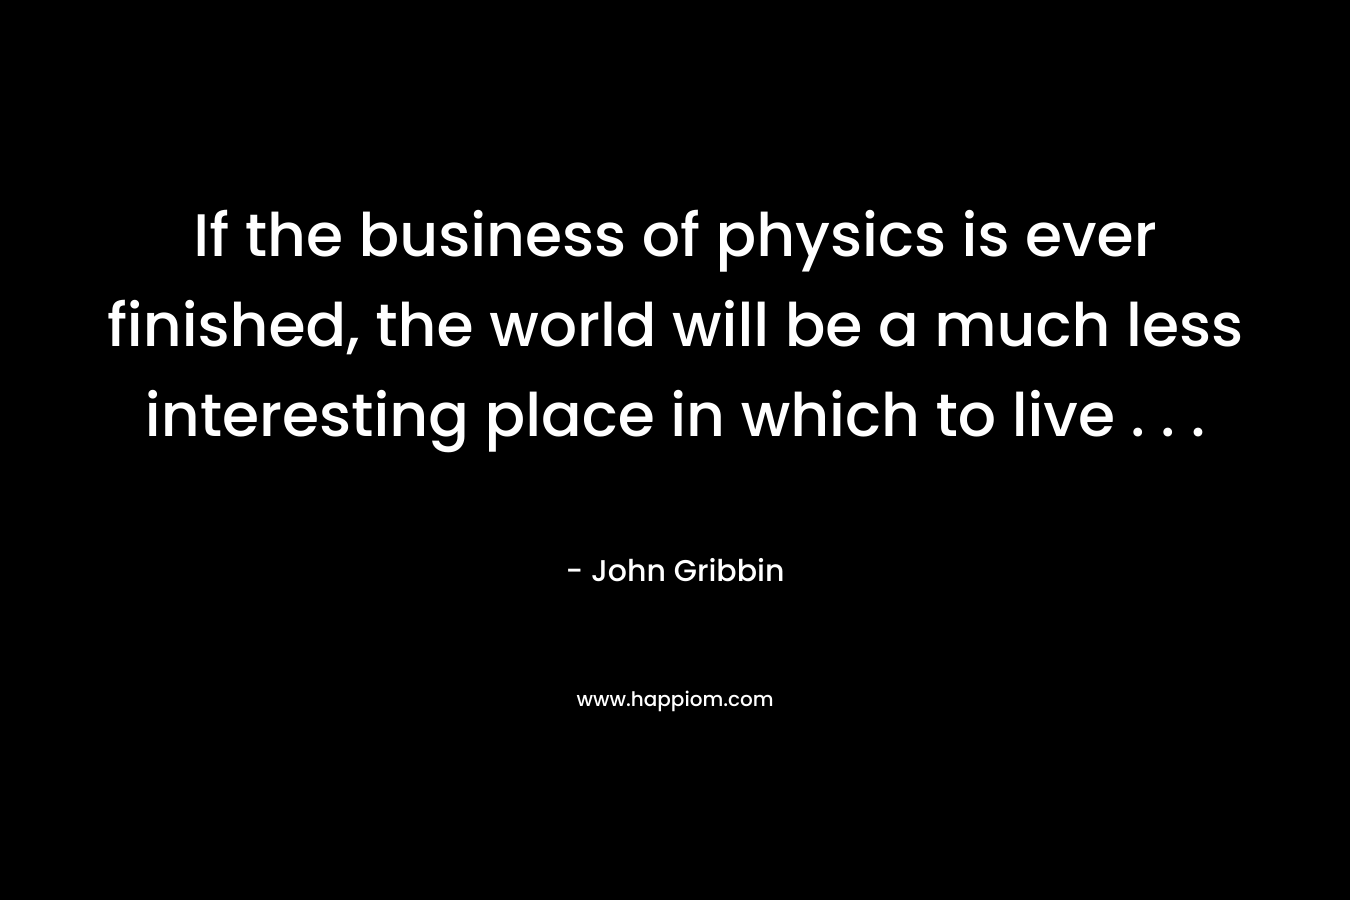 If the business of physics is ever finished, the world will be a much less interesting place in which to live . . .